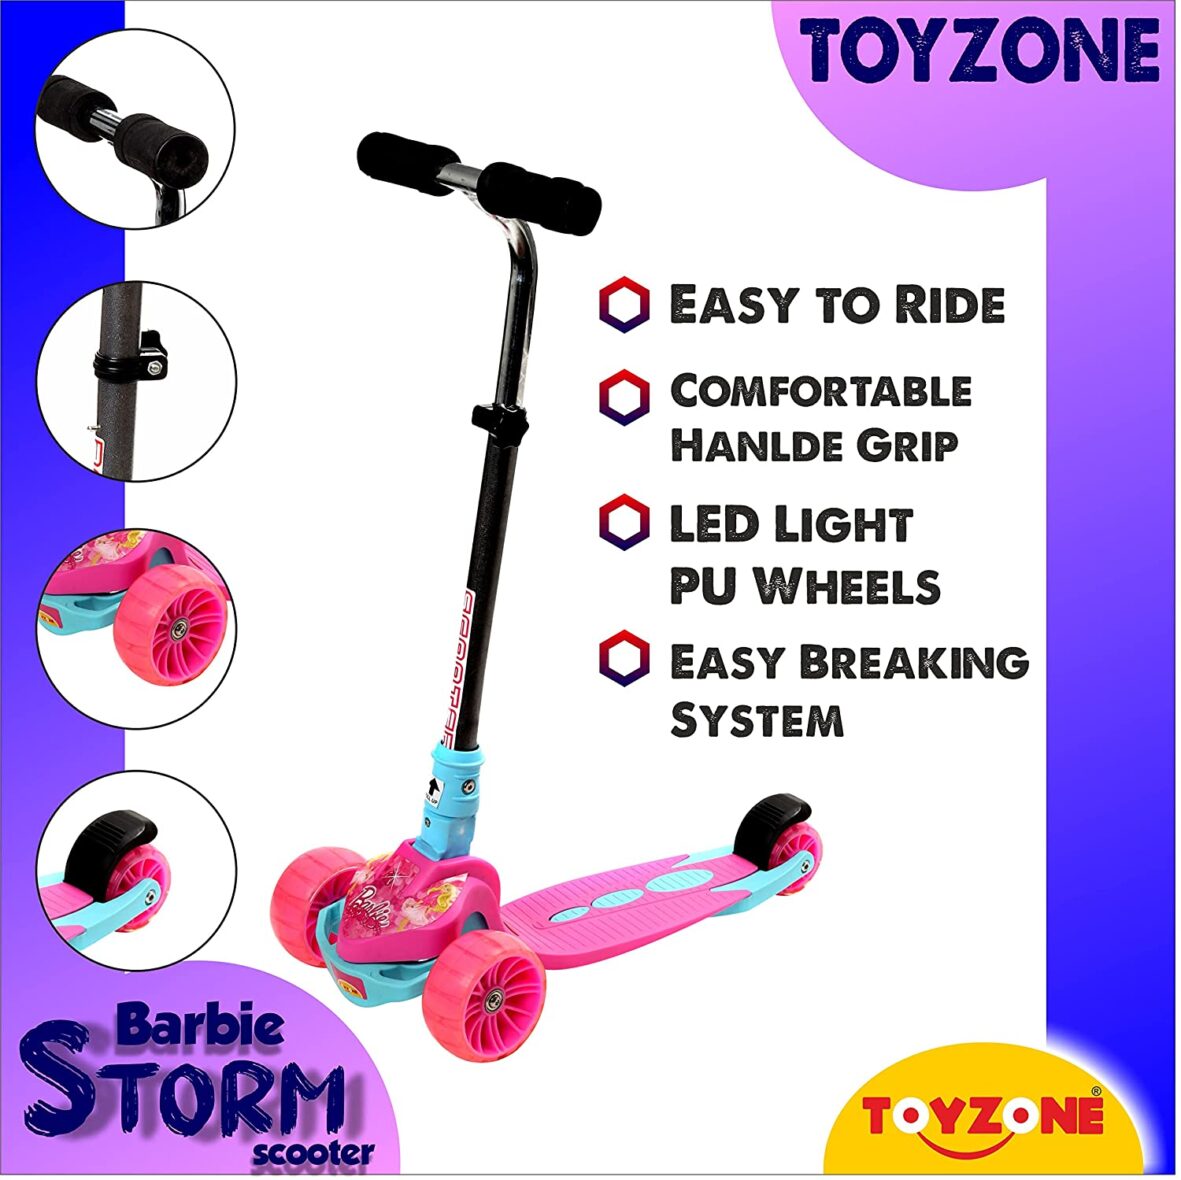 Toyzone Scooter Storm  Kids Skate Ride on  Smart Kick Scooter  Adjustable Height and Rear Brake  Foldable Scooter  for Kids Age 6+ Years Visit the Toyzone Store